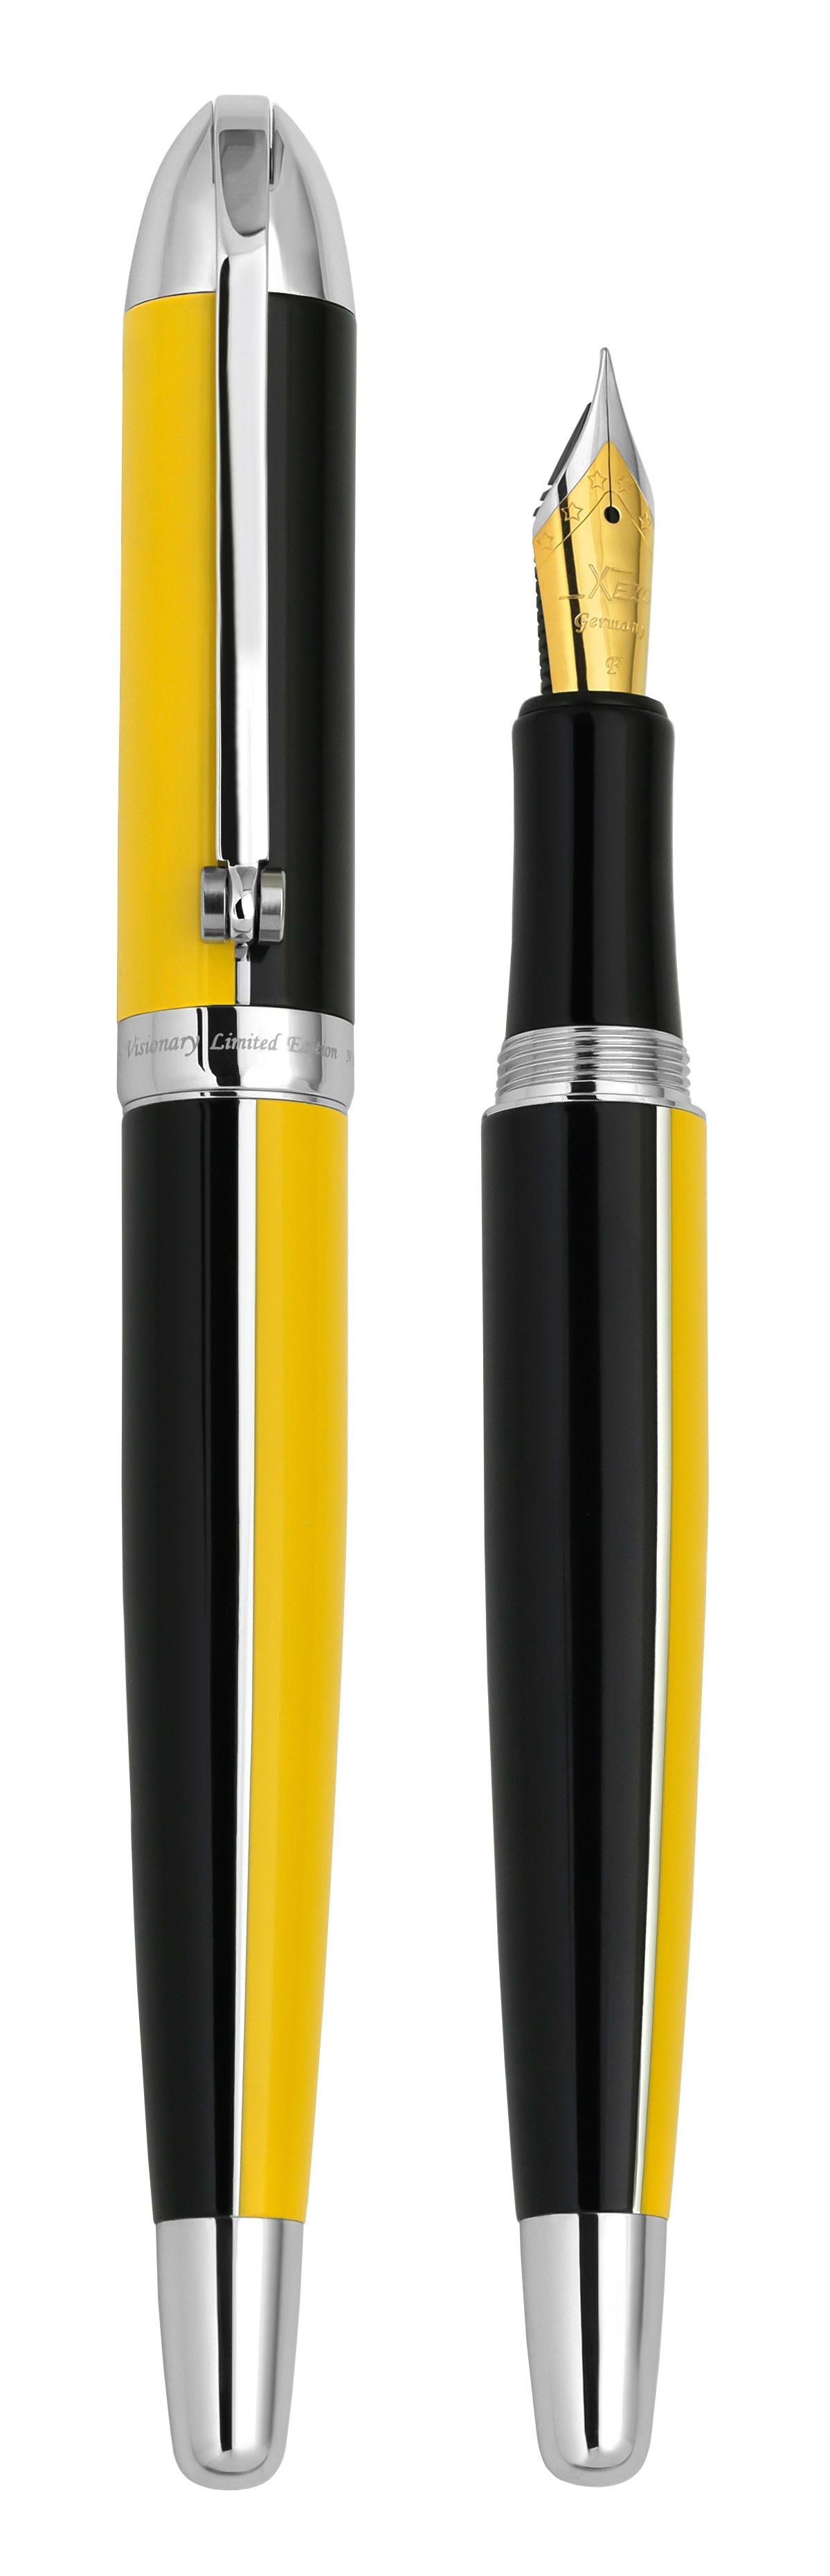 Xezo - Vertical view of two Visionary Speed Yellow/Black F fountain pens. The pen on the left is capped, and the pen on the right has no cap